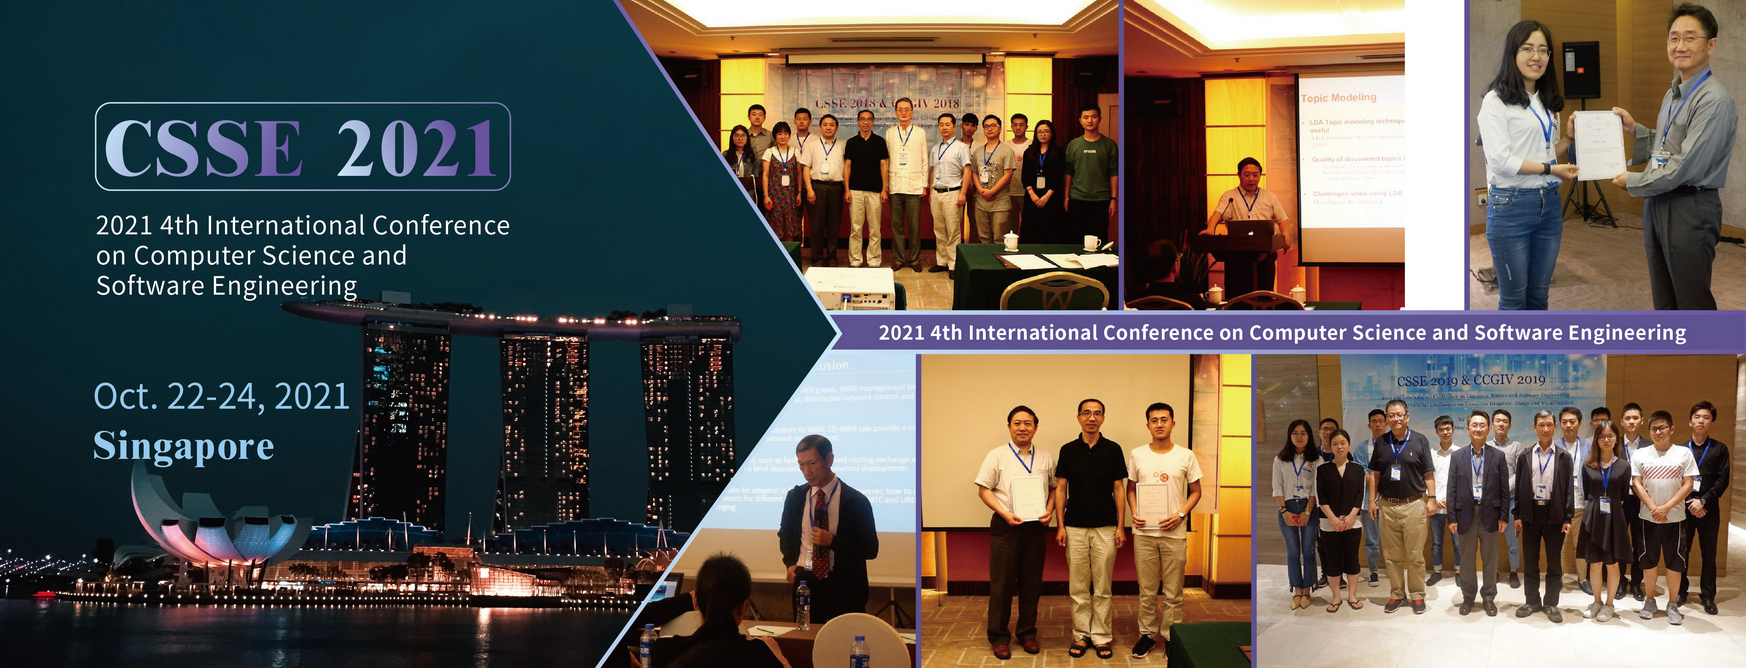 2021 4th International Conference on Computer Science and Software Engineering (CSSE 2021), Singapore, Central, Singapore